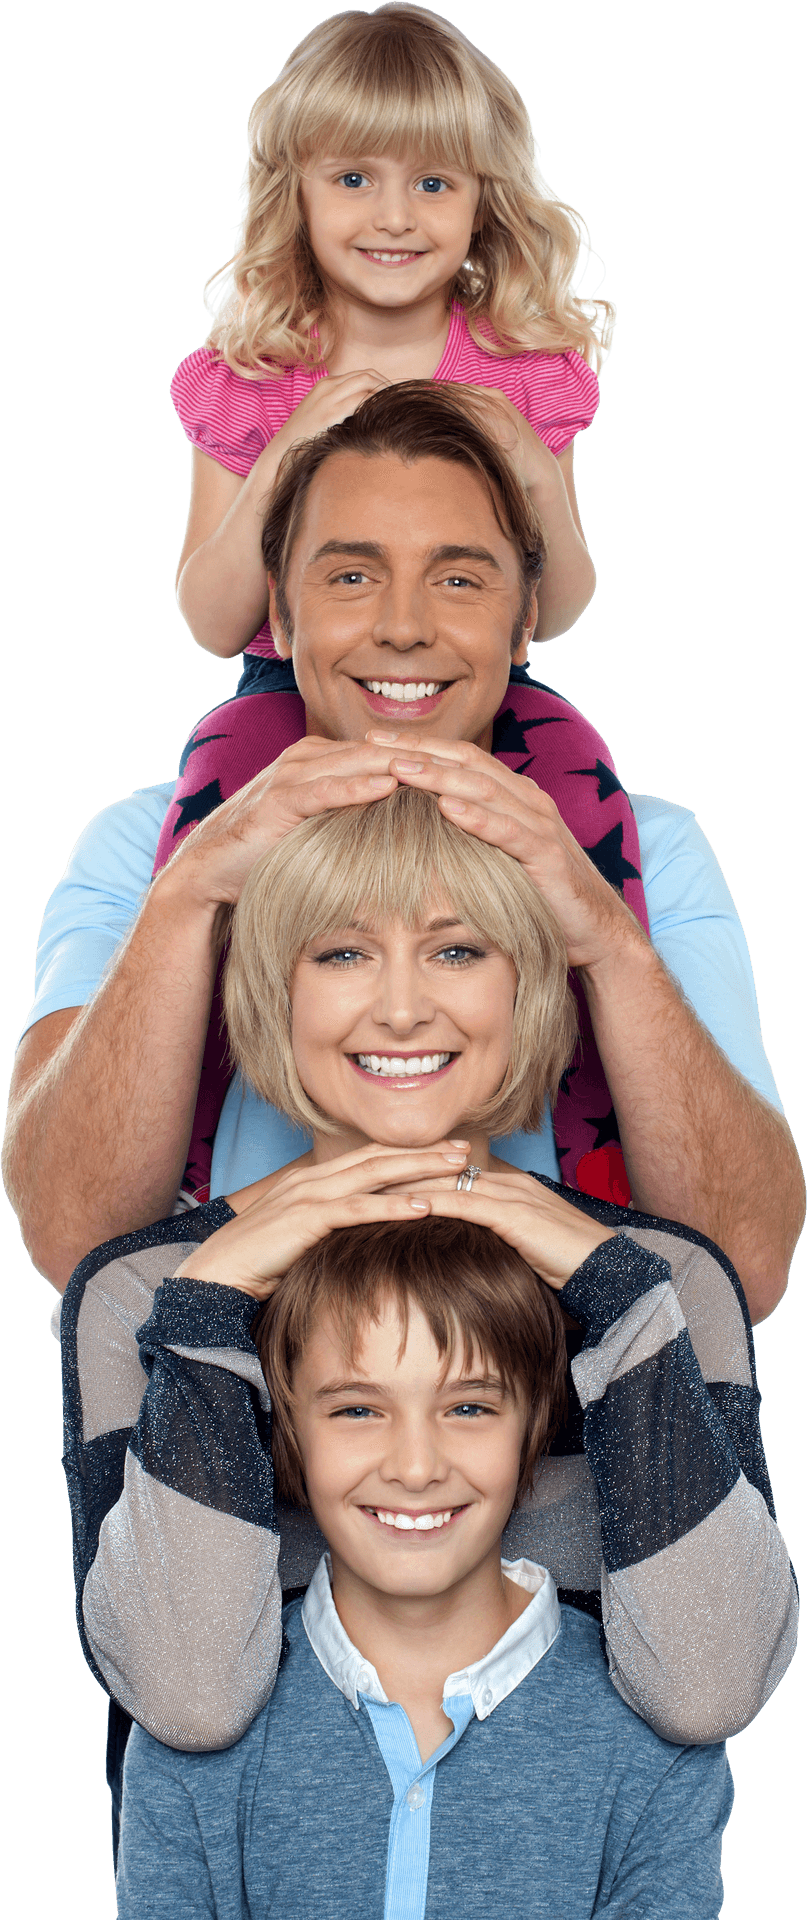 Happy Family Totem Pose PNG image